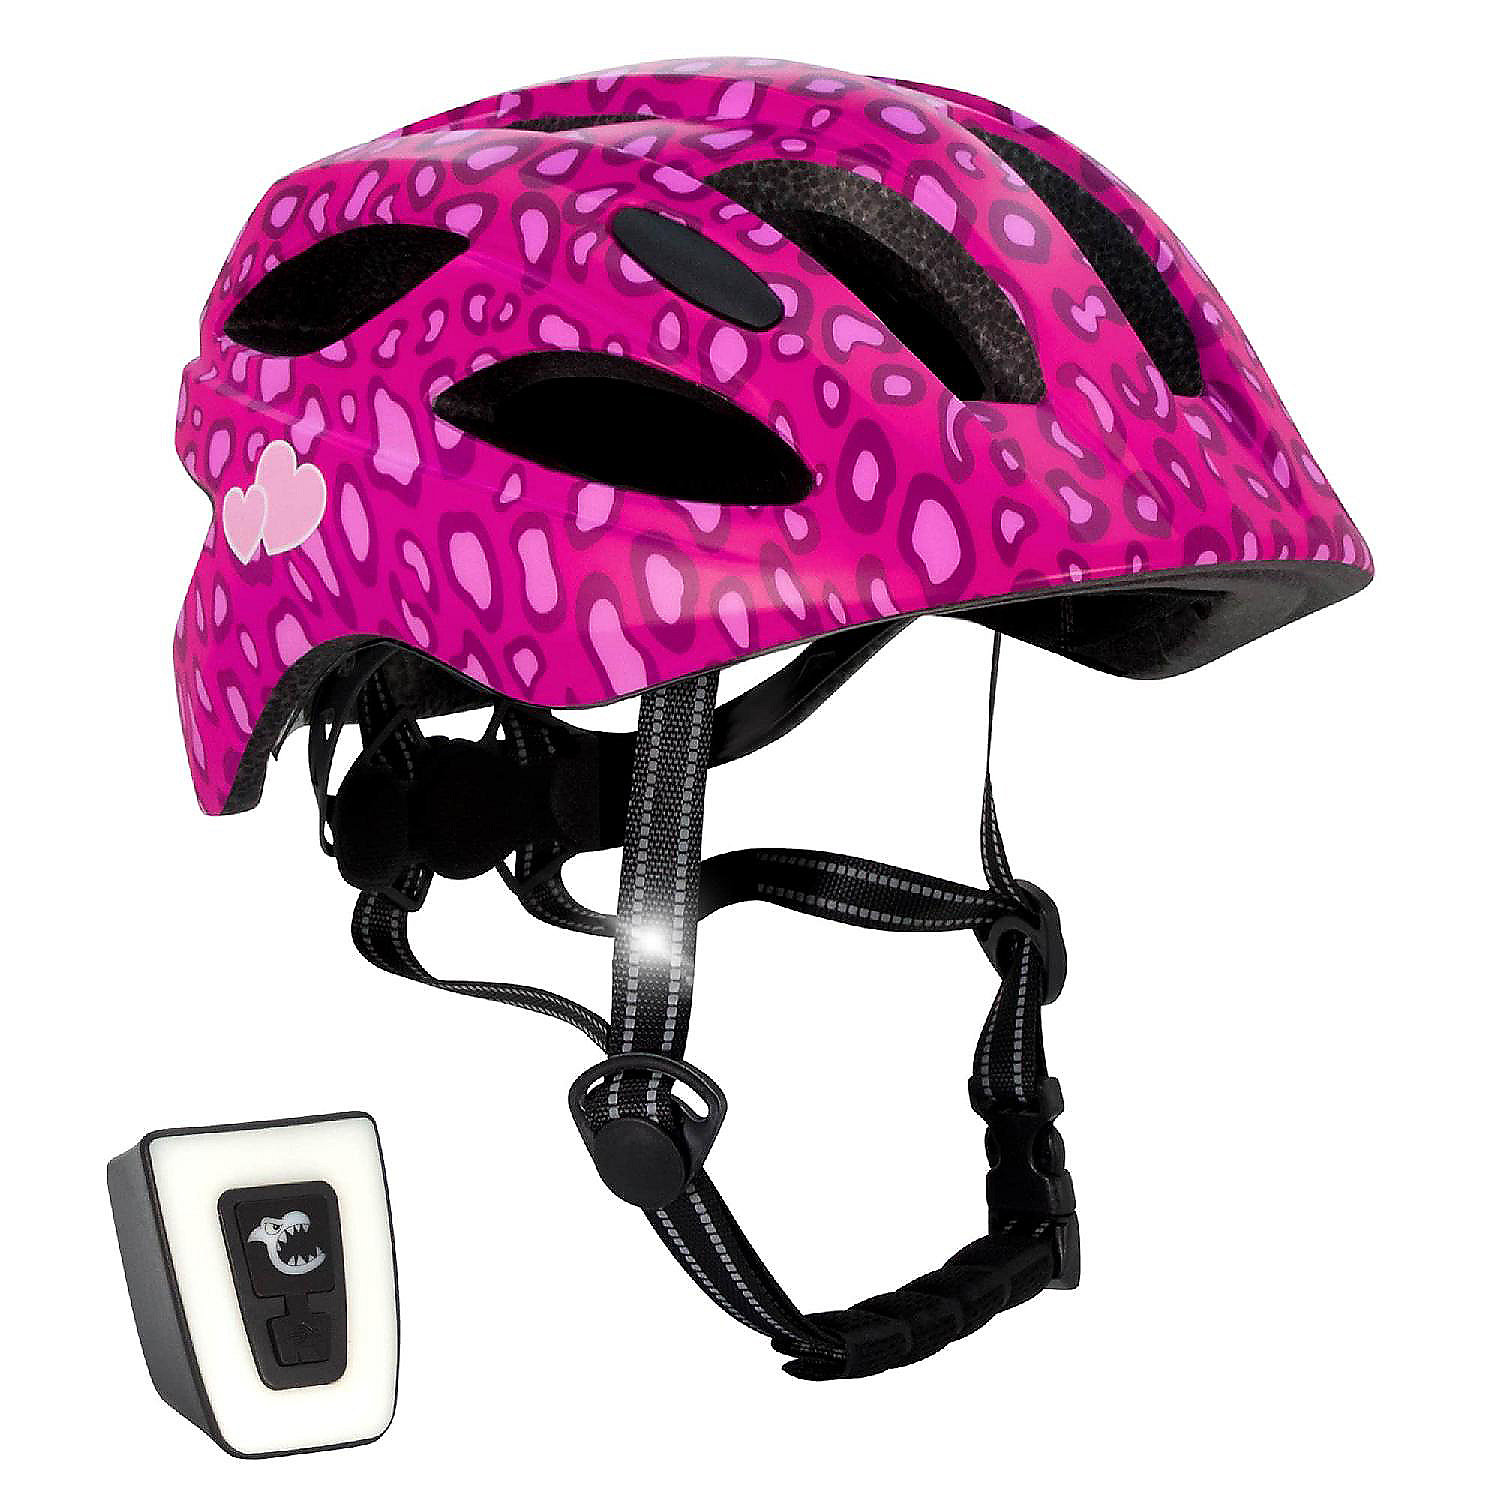 Ruwe slaap Vierde Classificeren Crazy Safety - Bicycle Helmet for kids age 6-12 years - Headsize 21-23  inches - Pink Spots - CPSC Certified | Oriental Trading